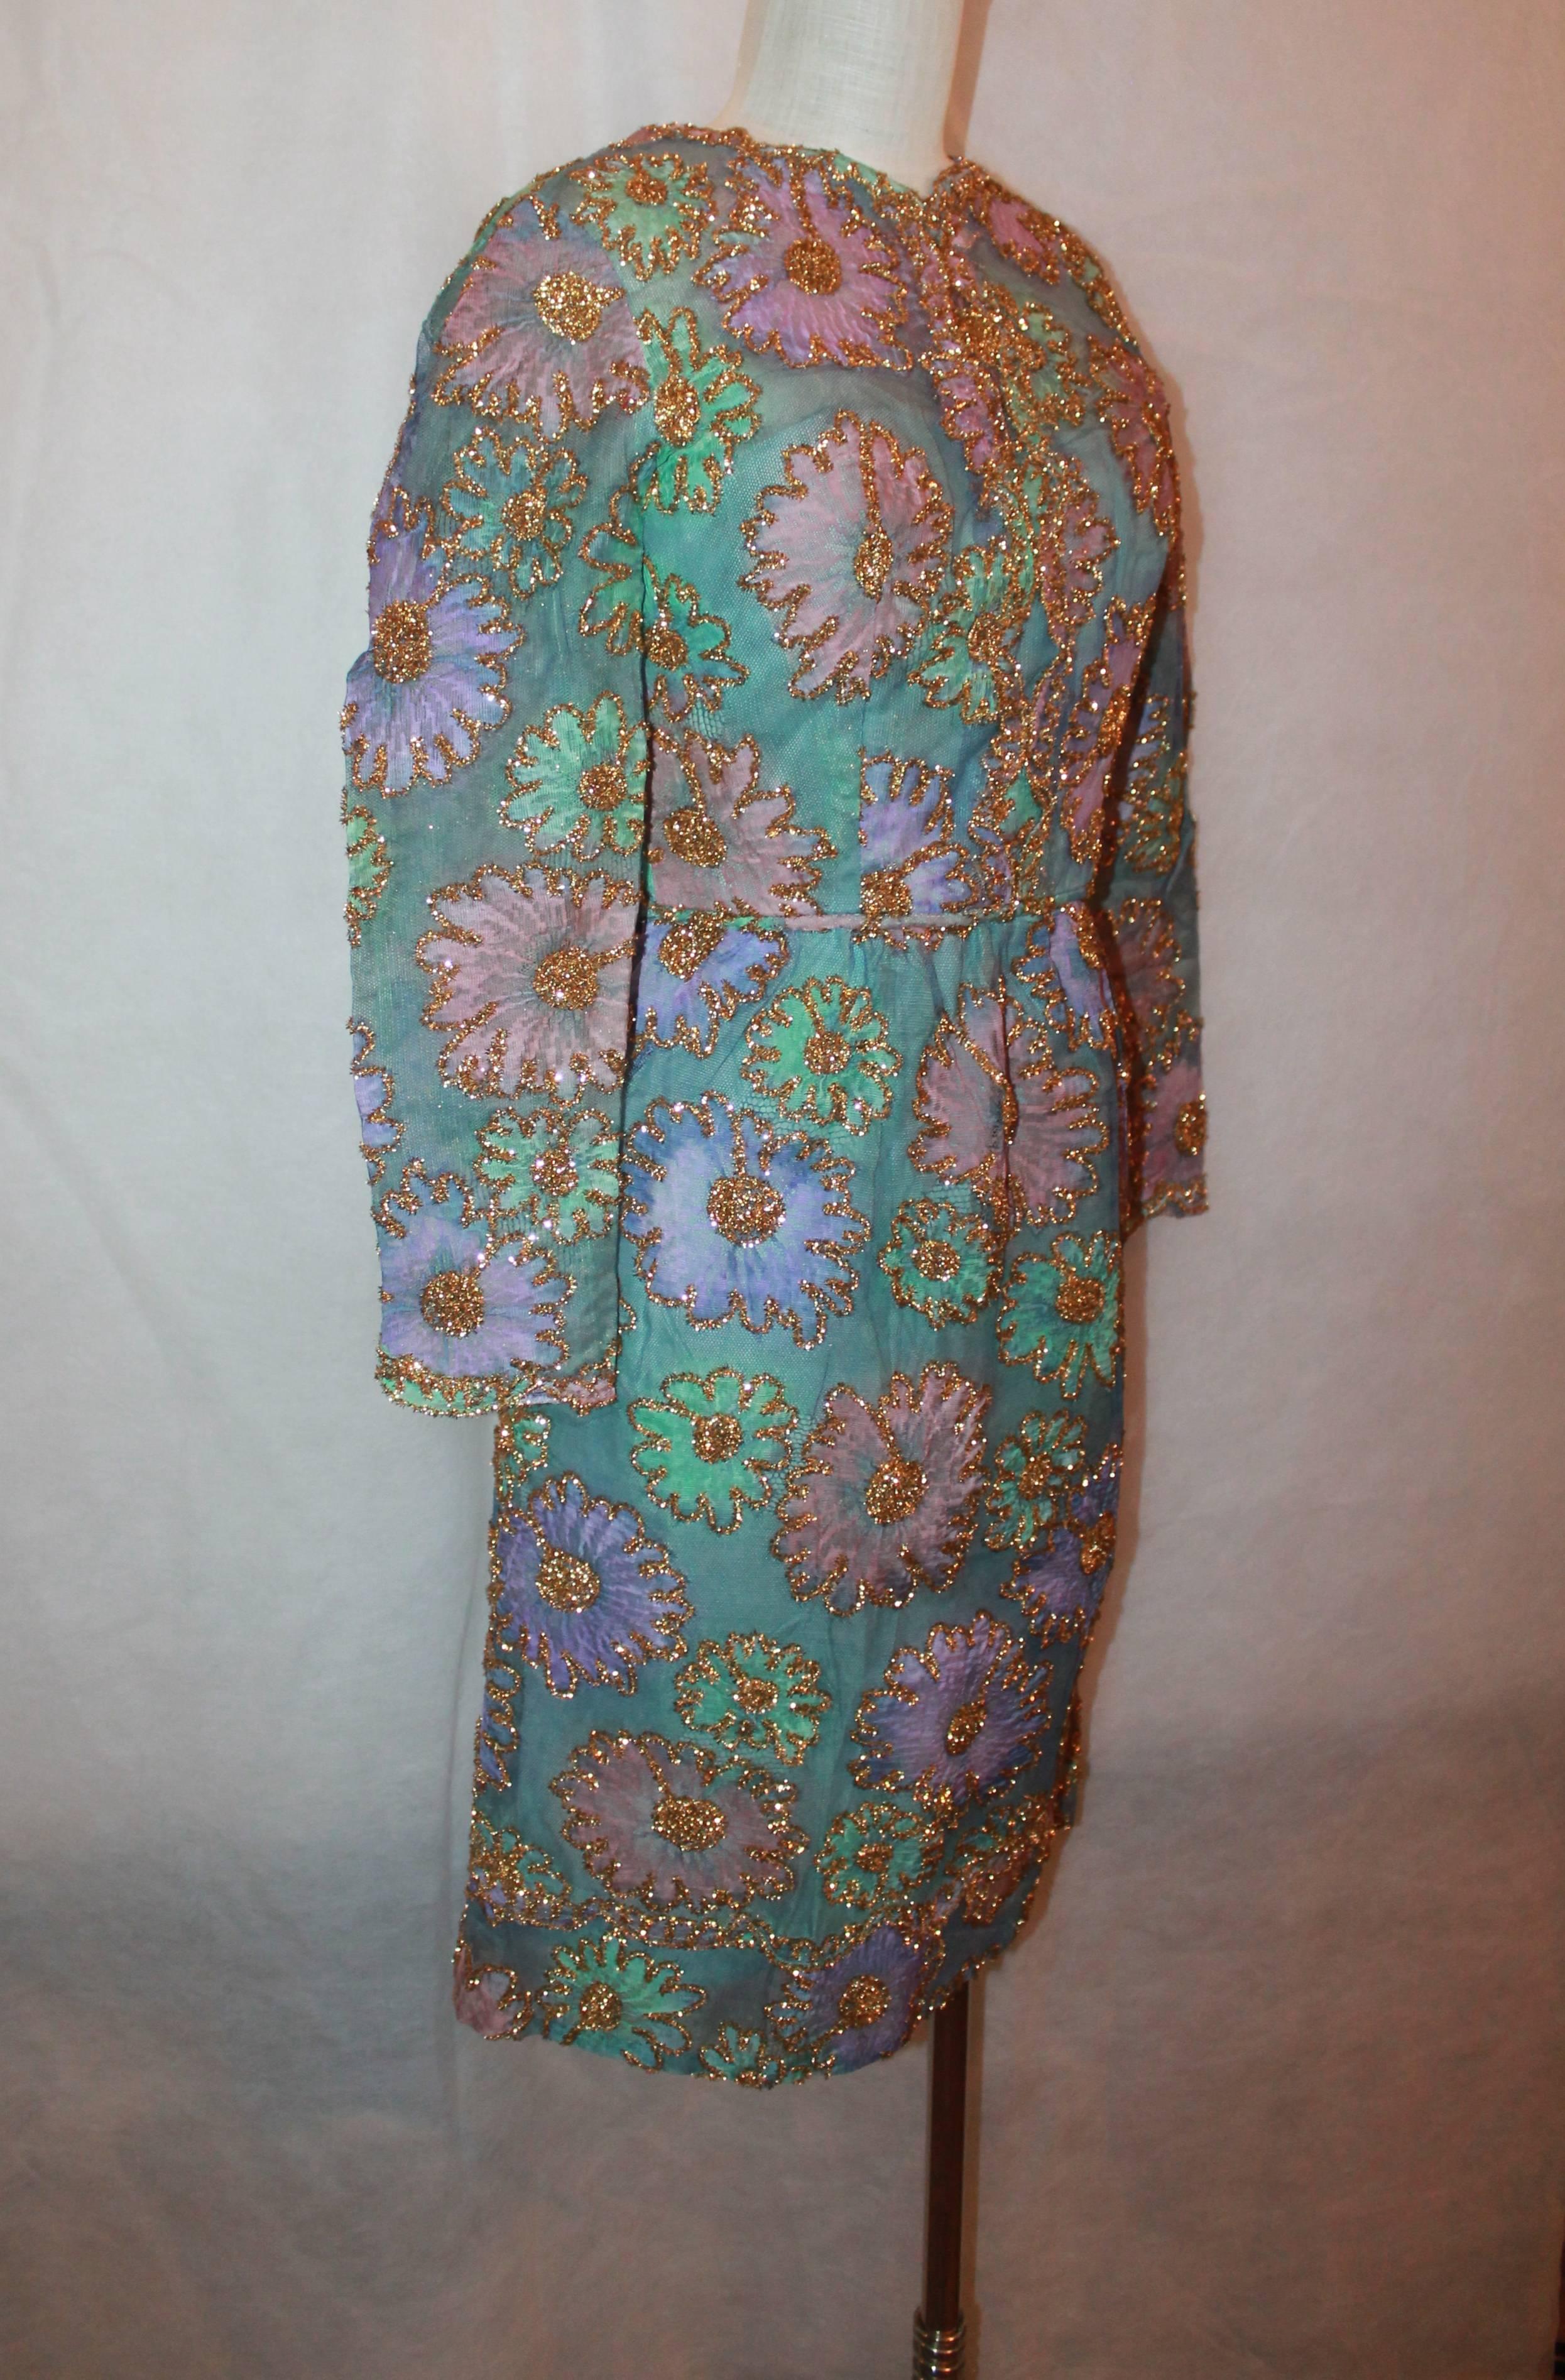 Sarmi 1960's Pastels Lace & Tinsel Long Sleeve Dress - M. This dress is in excellent vintage condition and has a slip. It has aqua, pink, purple floral lace with gold tinsel trim. 

Measurements:
Bust- 36"
Shoulder to Shoulder-